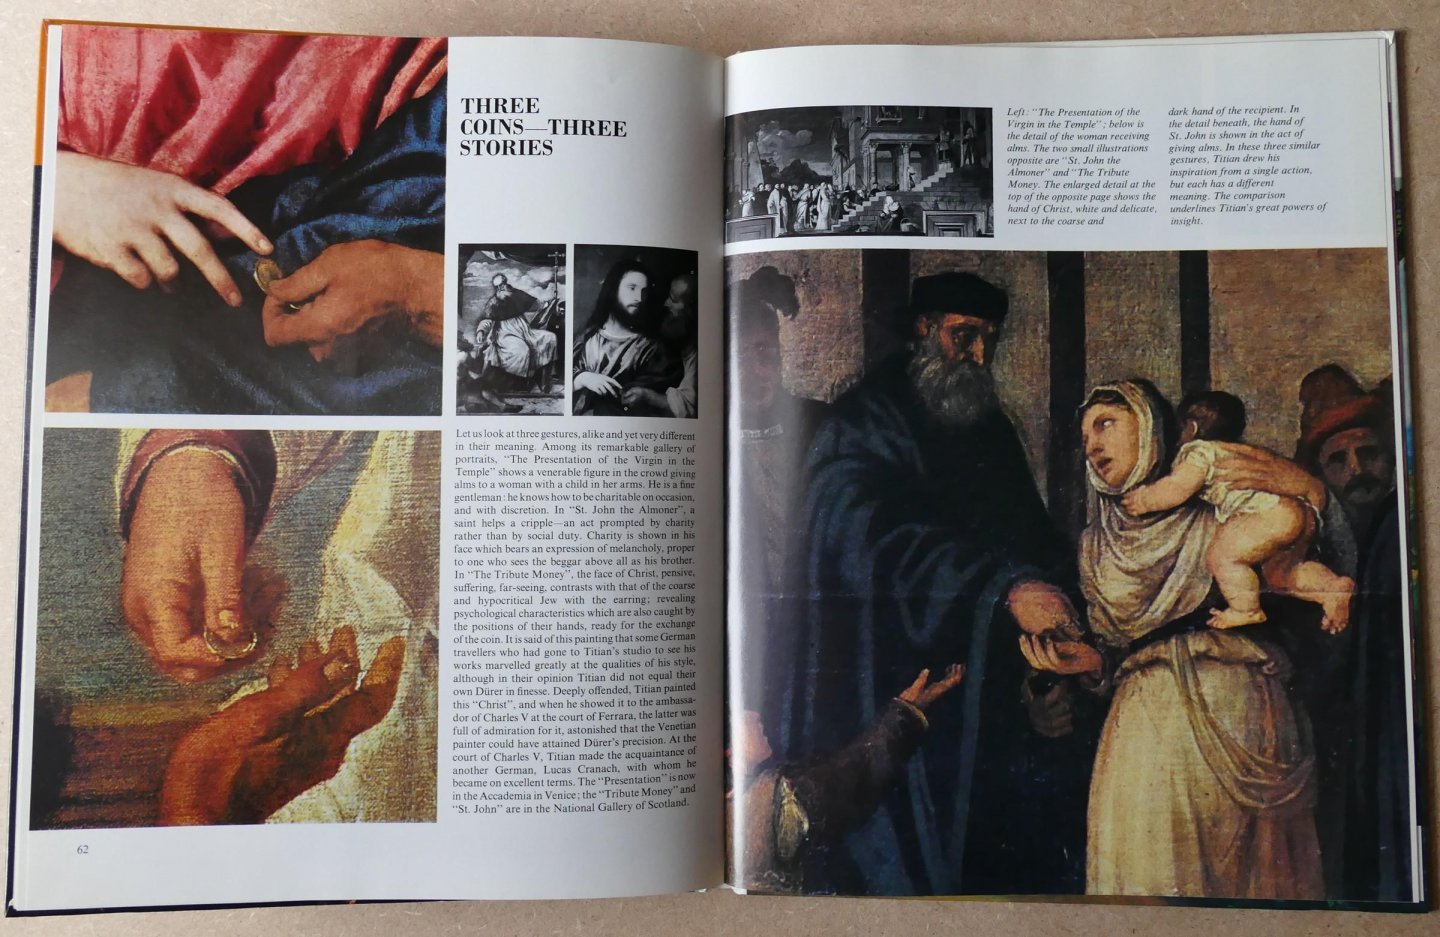 Orlandi, Enzo - Titian, The life and times of..